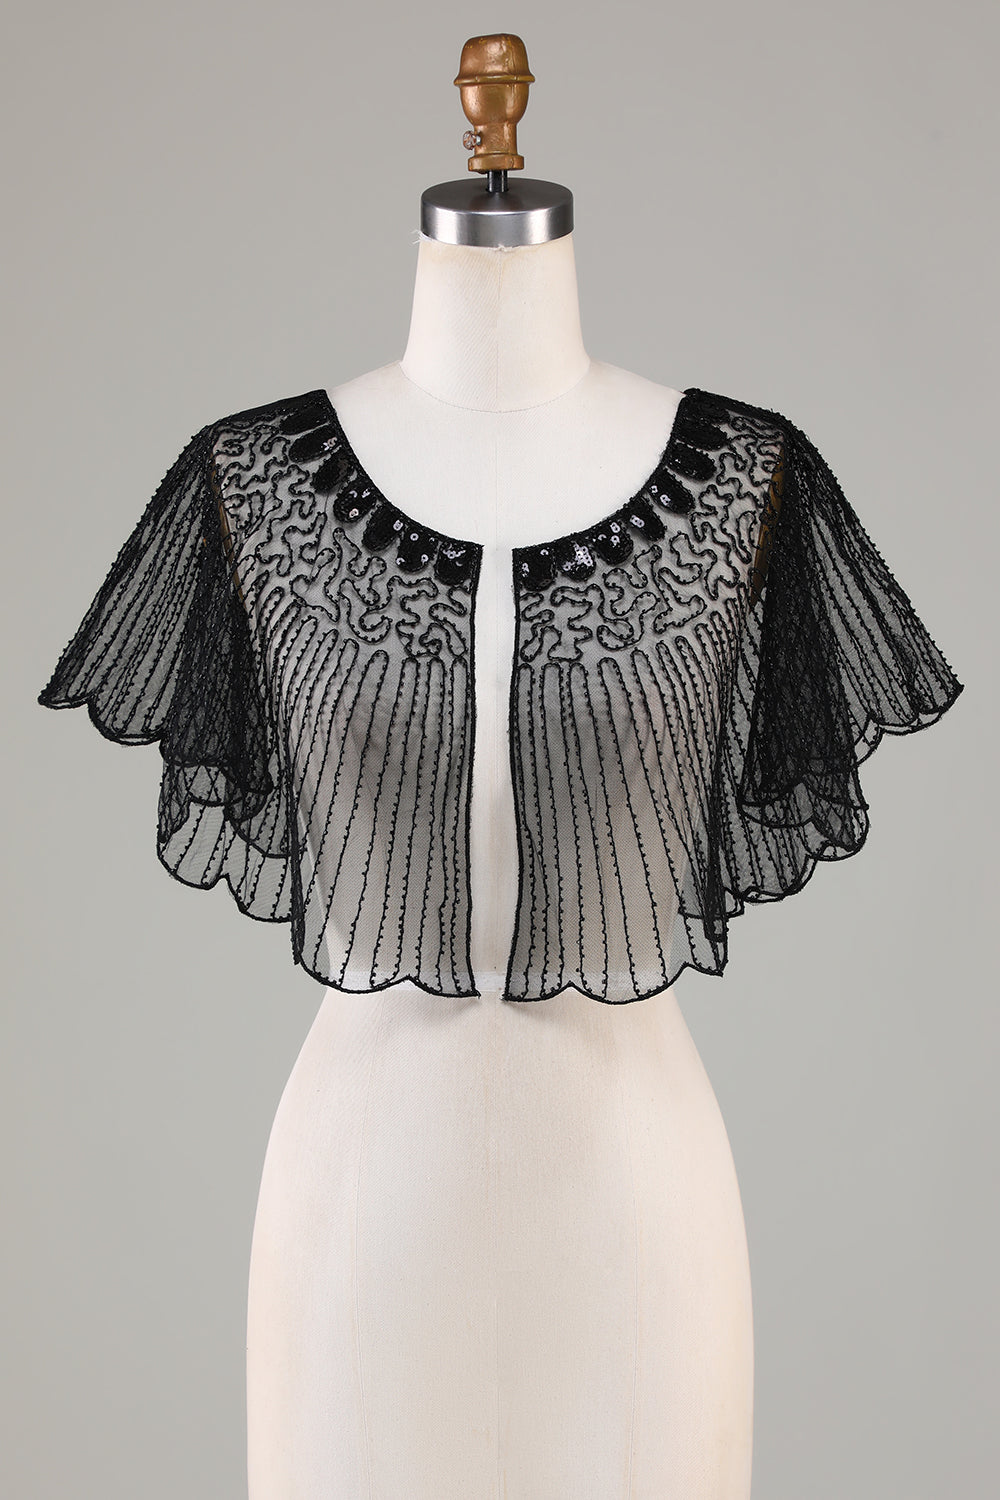 Sequins Black Glitter 1920s Cape with Beaded